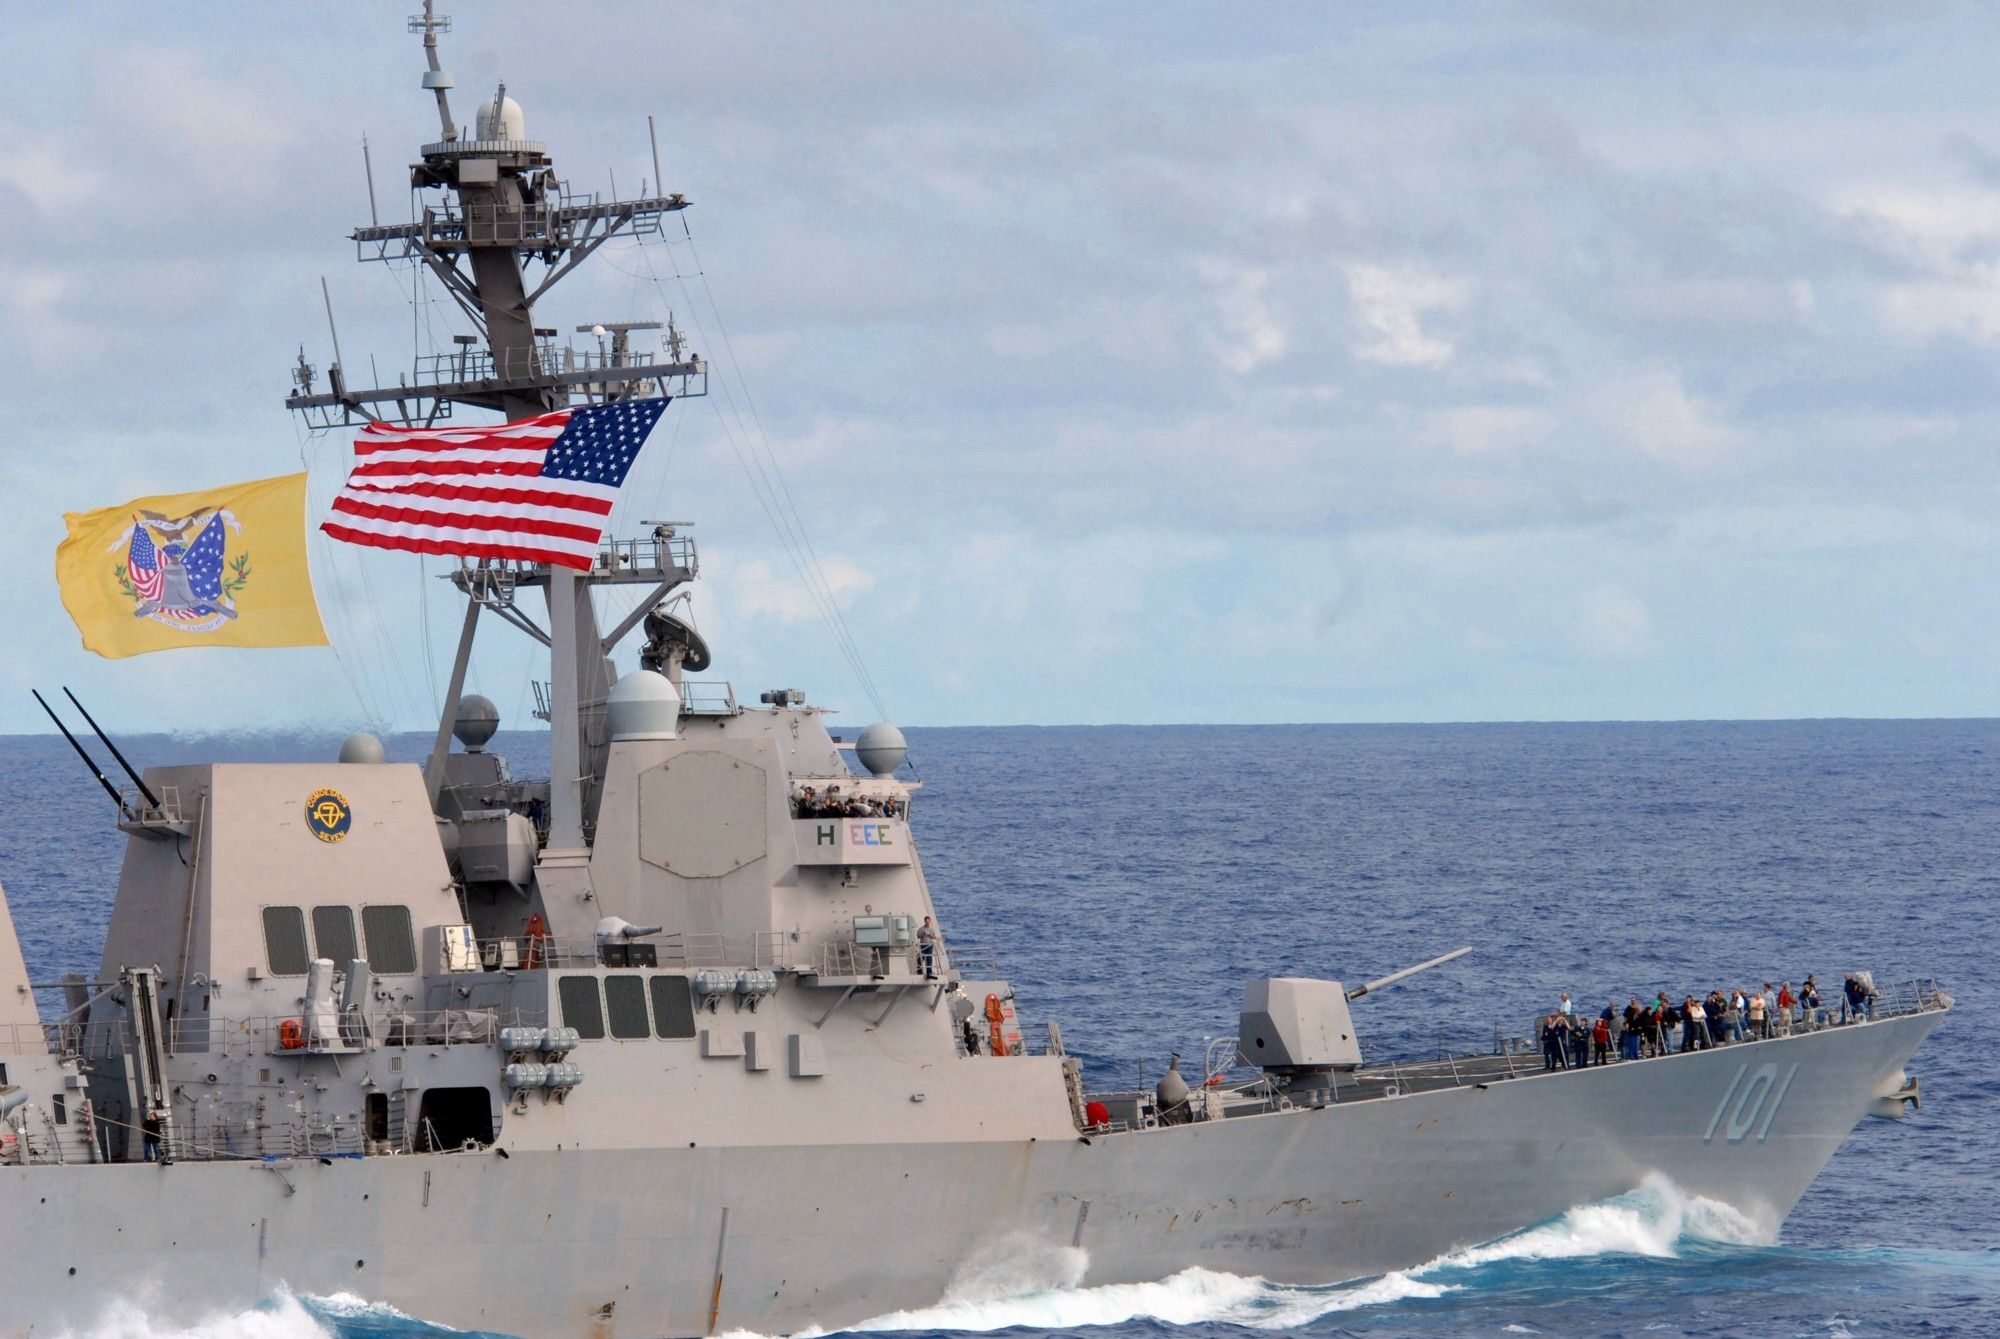 ddg-101 uss gridley arleigh burke class guided missile destroyer aegis us navy 37